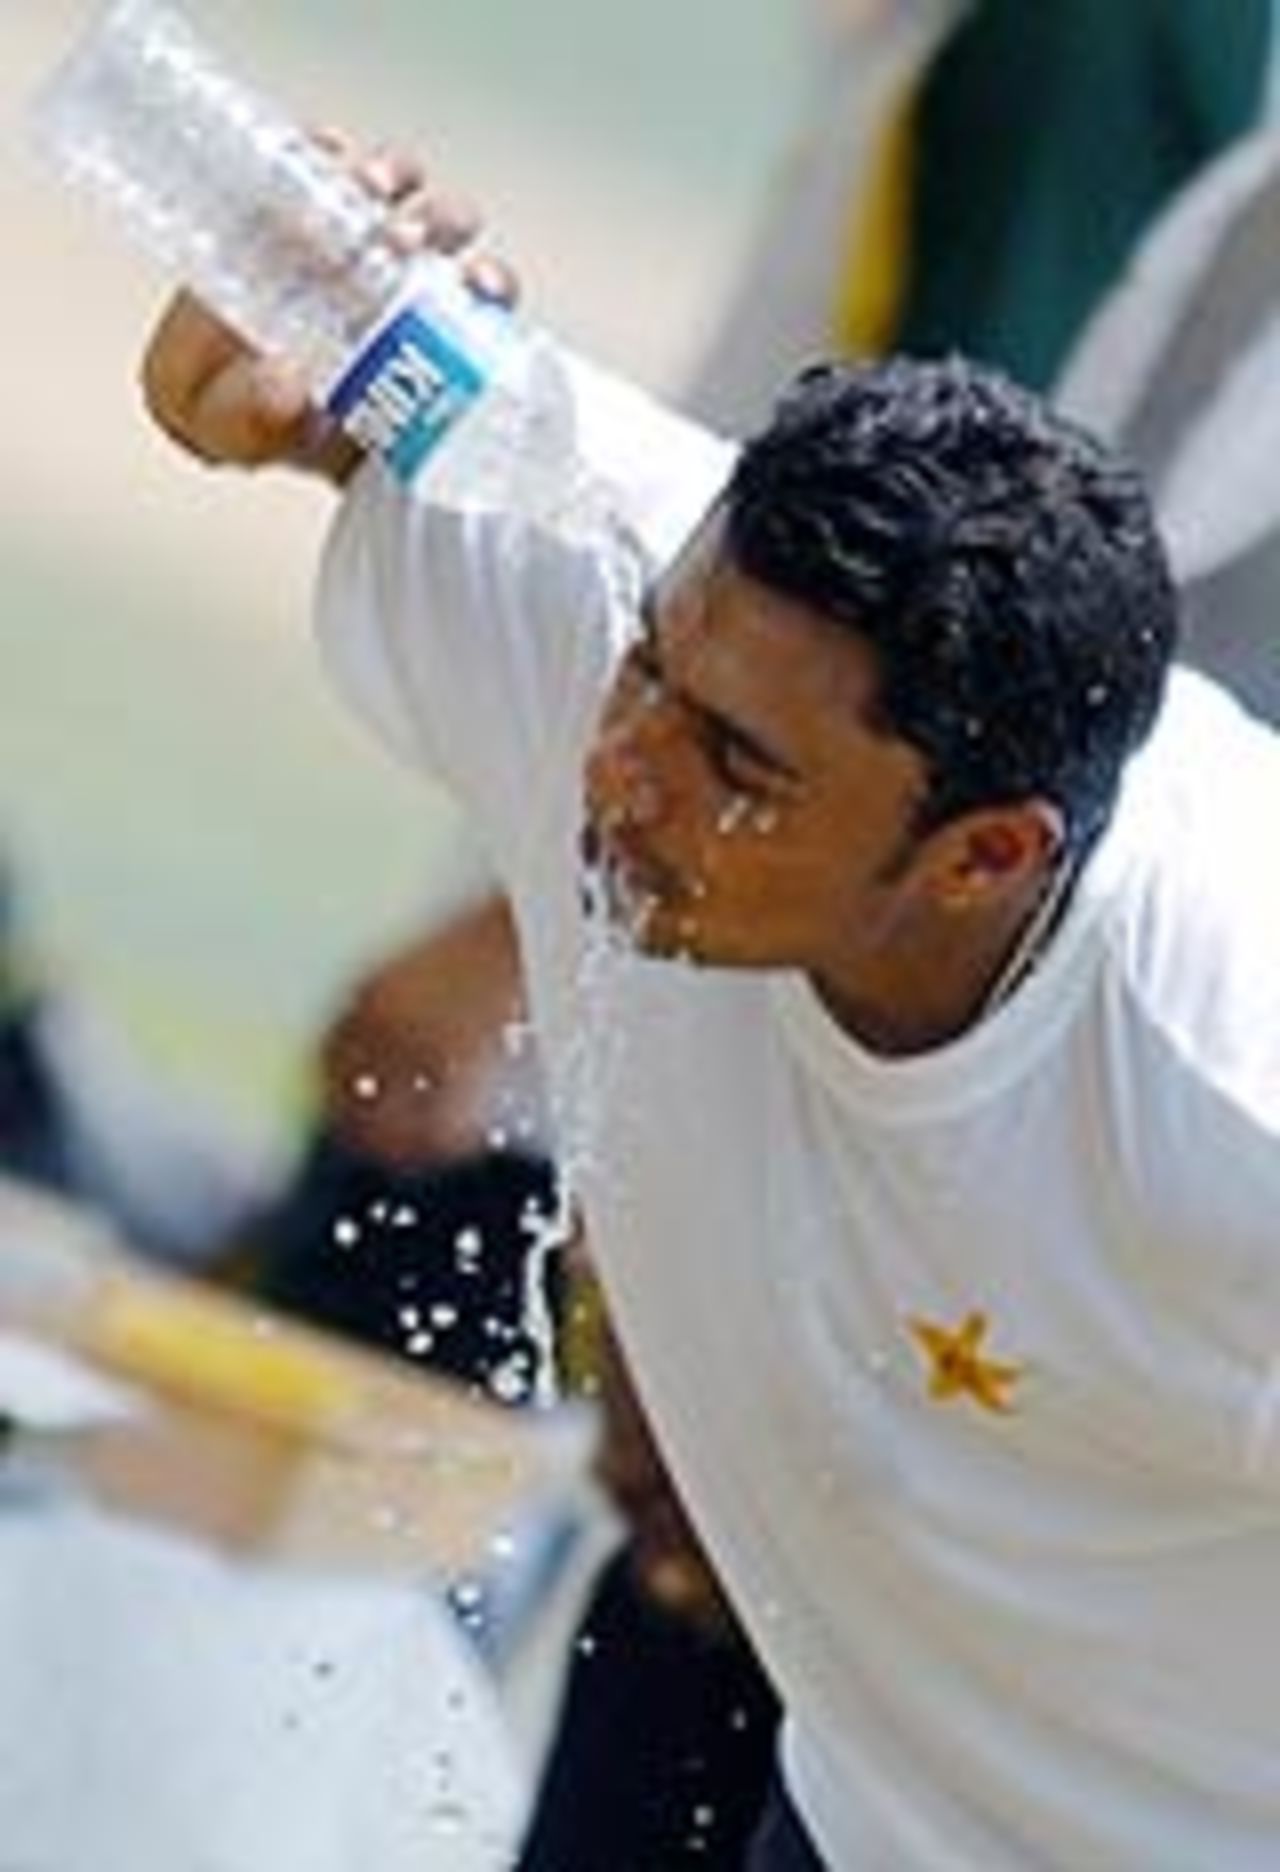 Danish Kaneria cools himself down ahead of the second one-dayer at Vizag, April 4, 2005